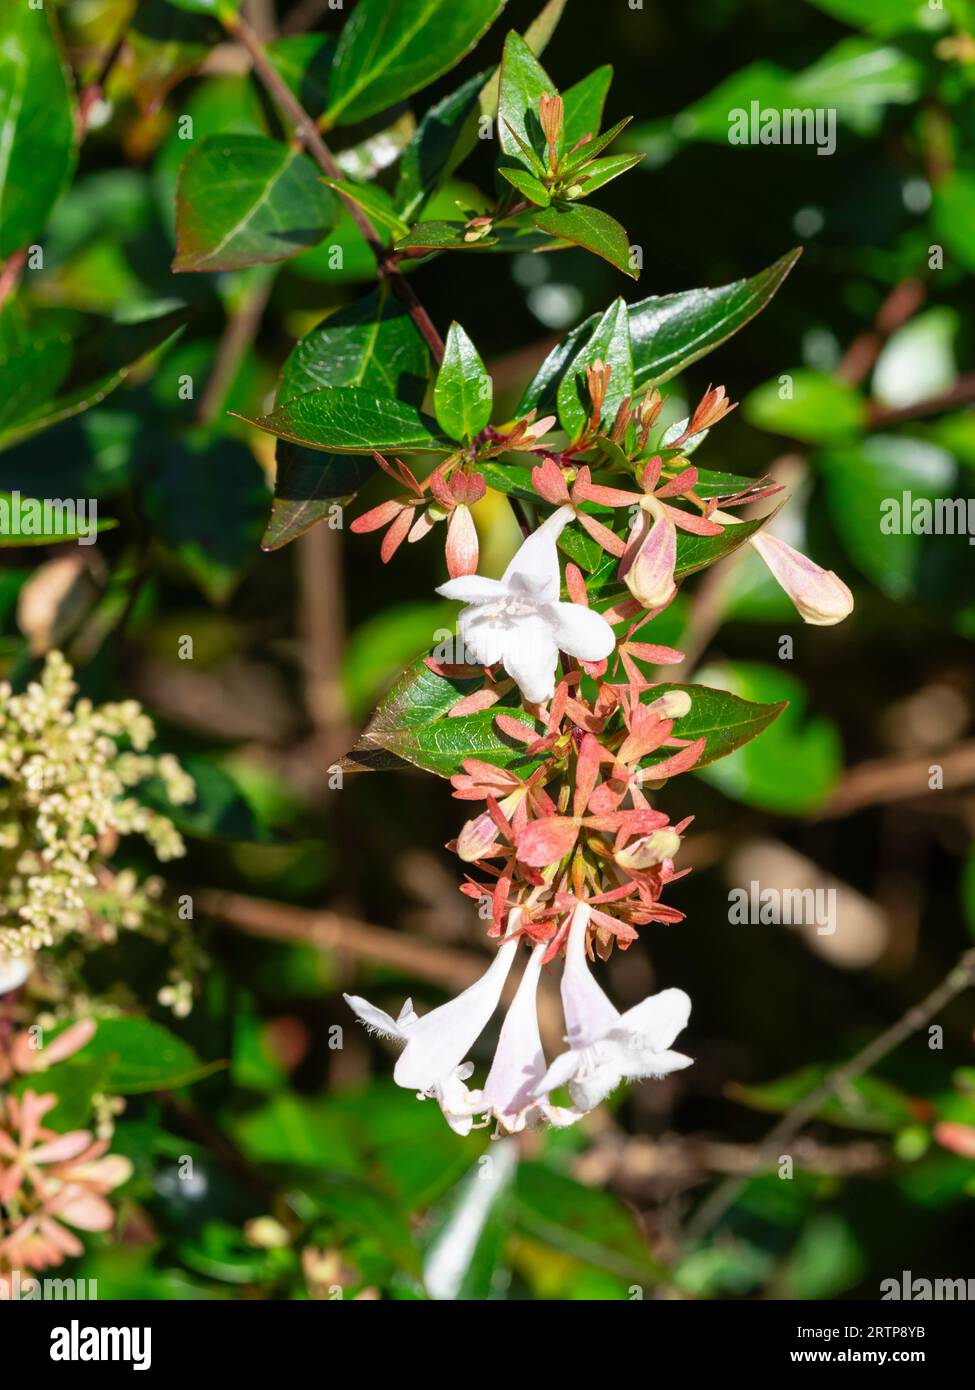 White flowers and red calyces of the hardy evergreen, late summer to autumn flowering shrub, Abelia x grandiflora Stock Photo